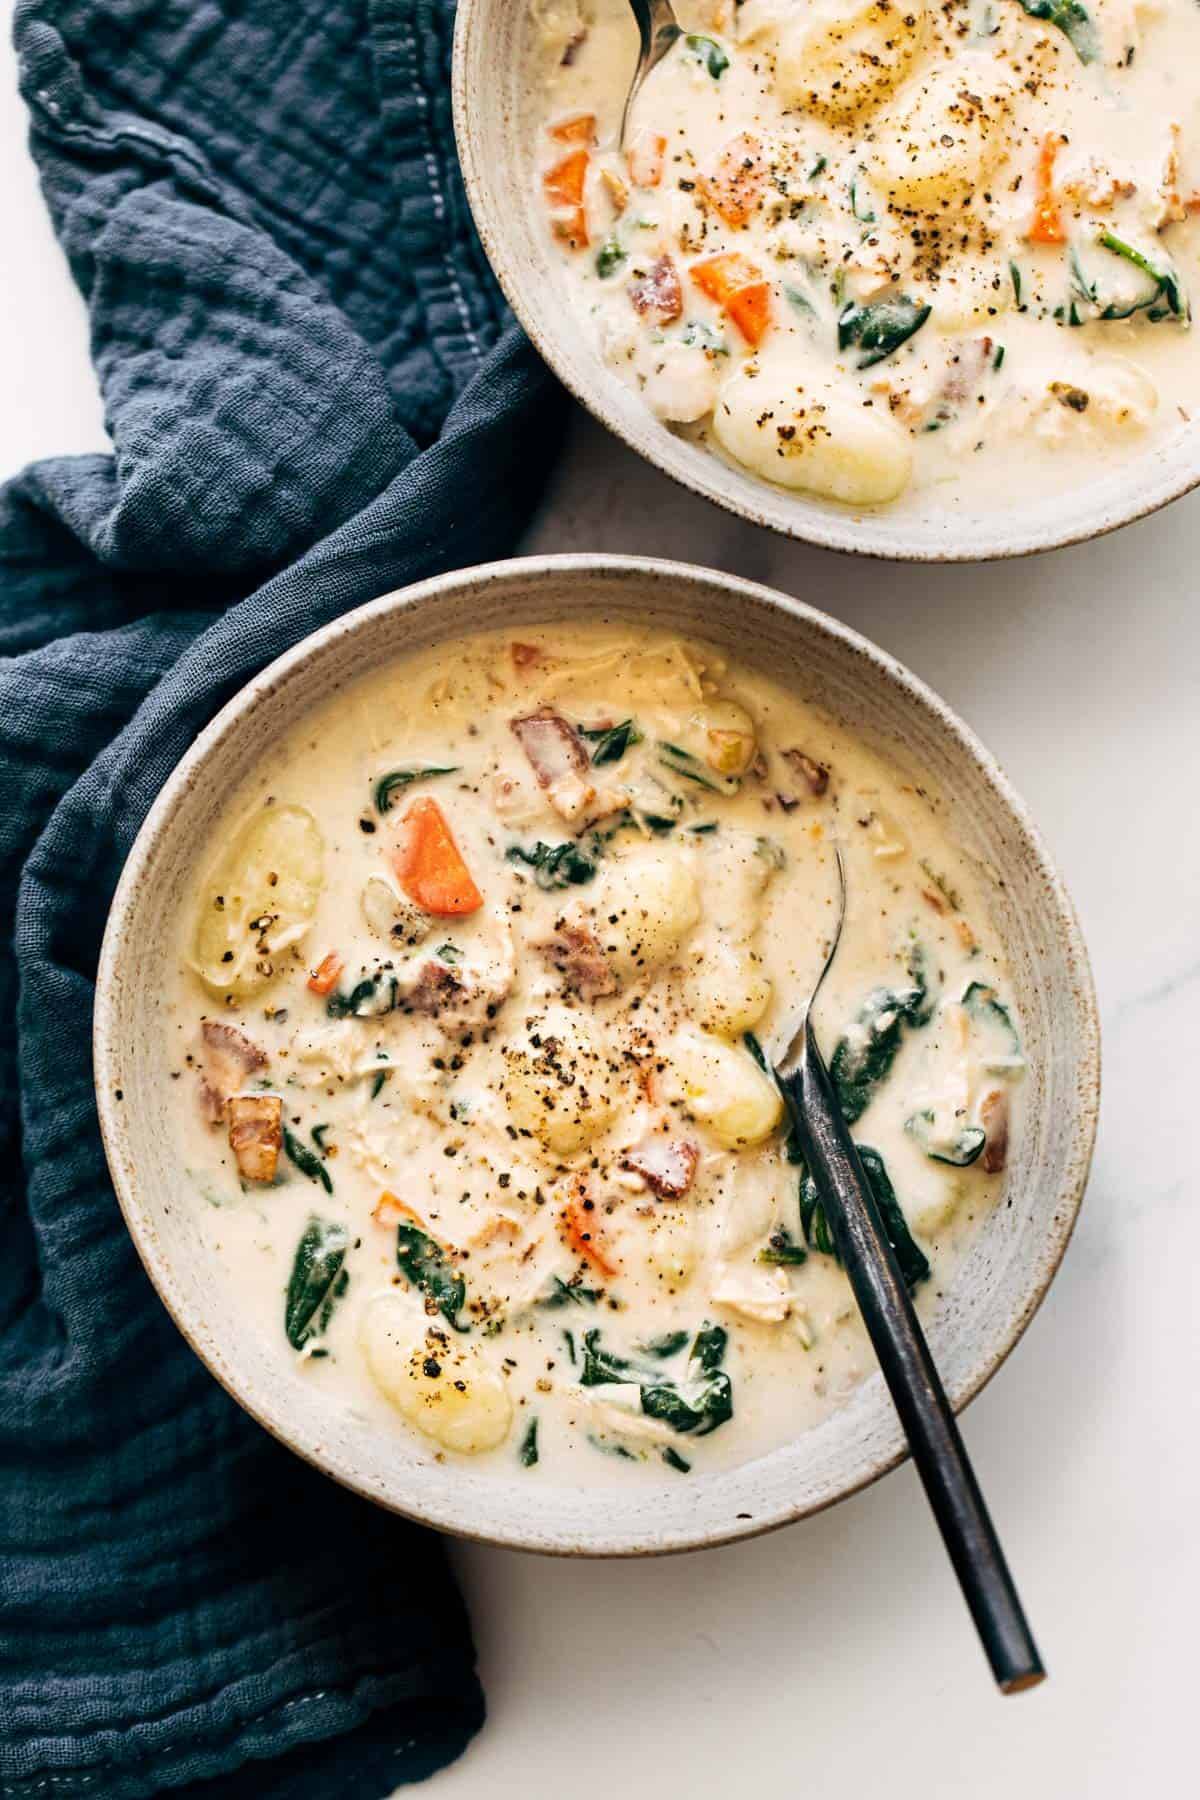 Crockpot Chicken Gnocchi Soup in a bowl with a spoon.